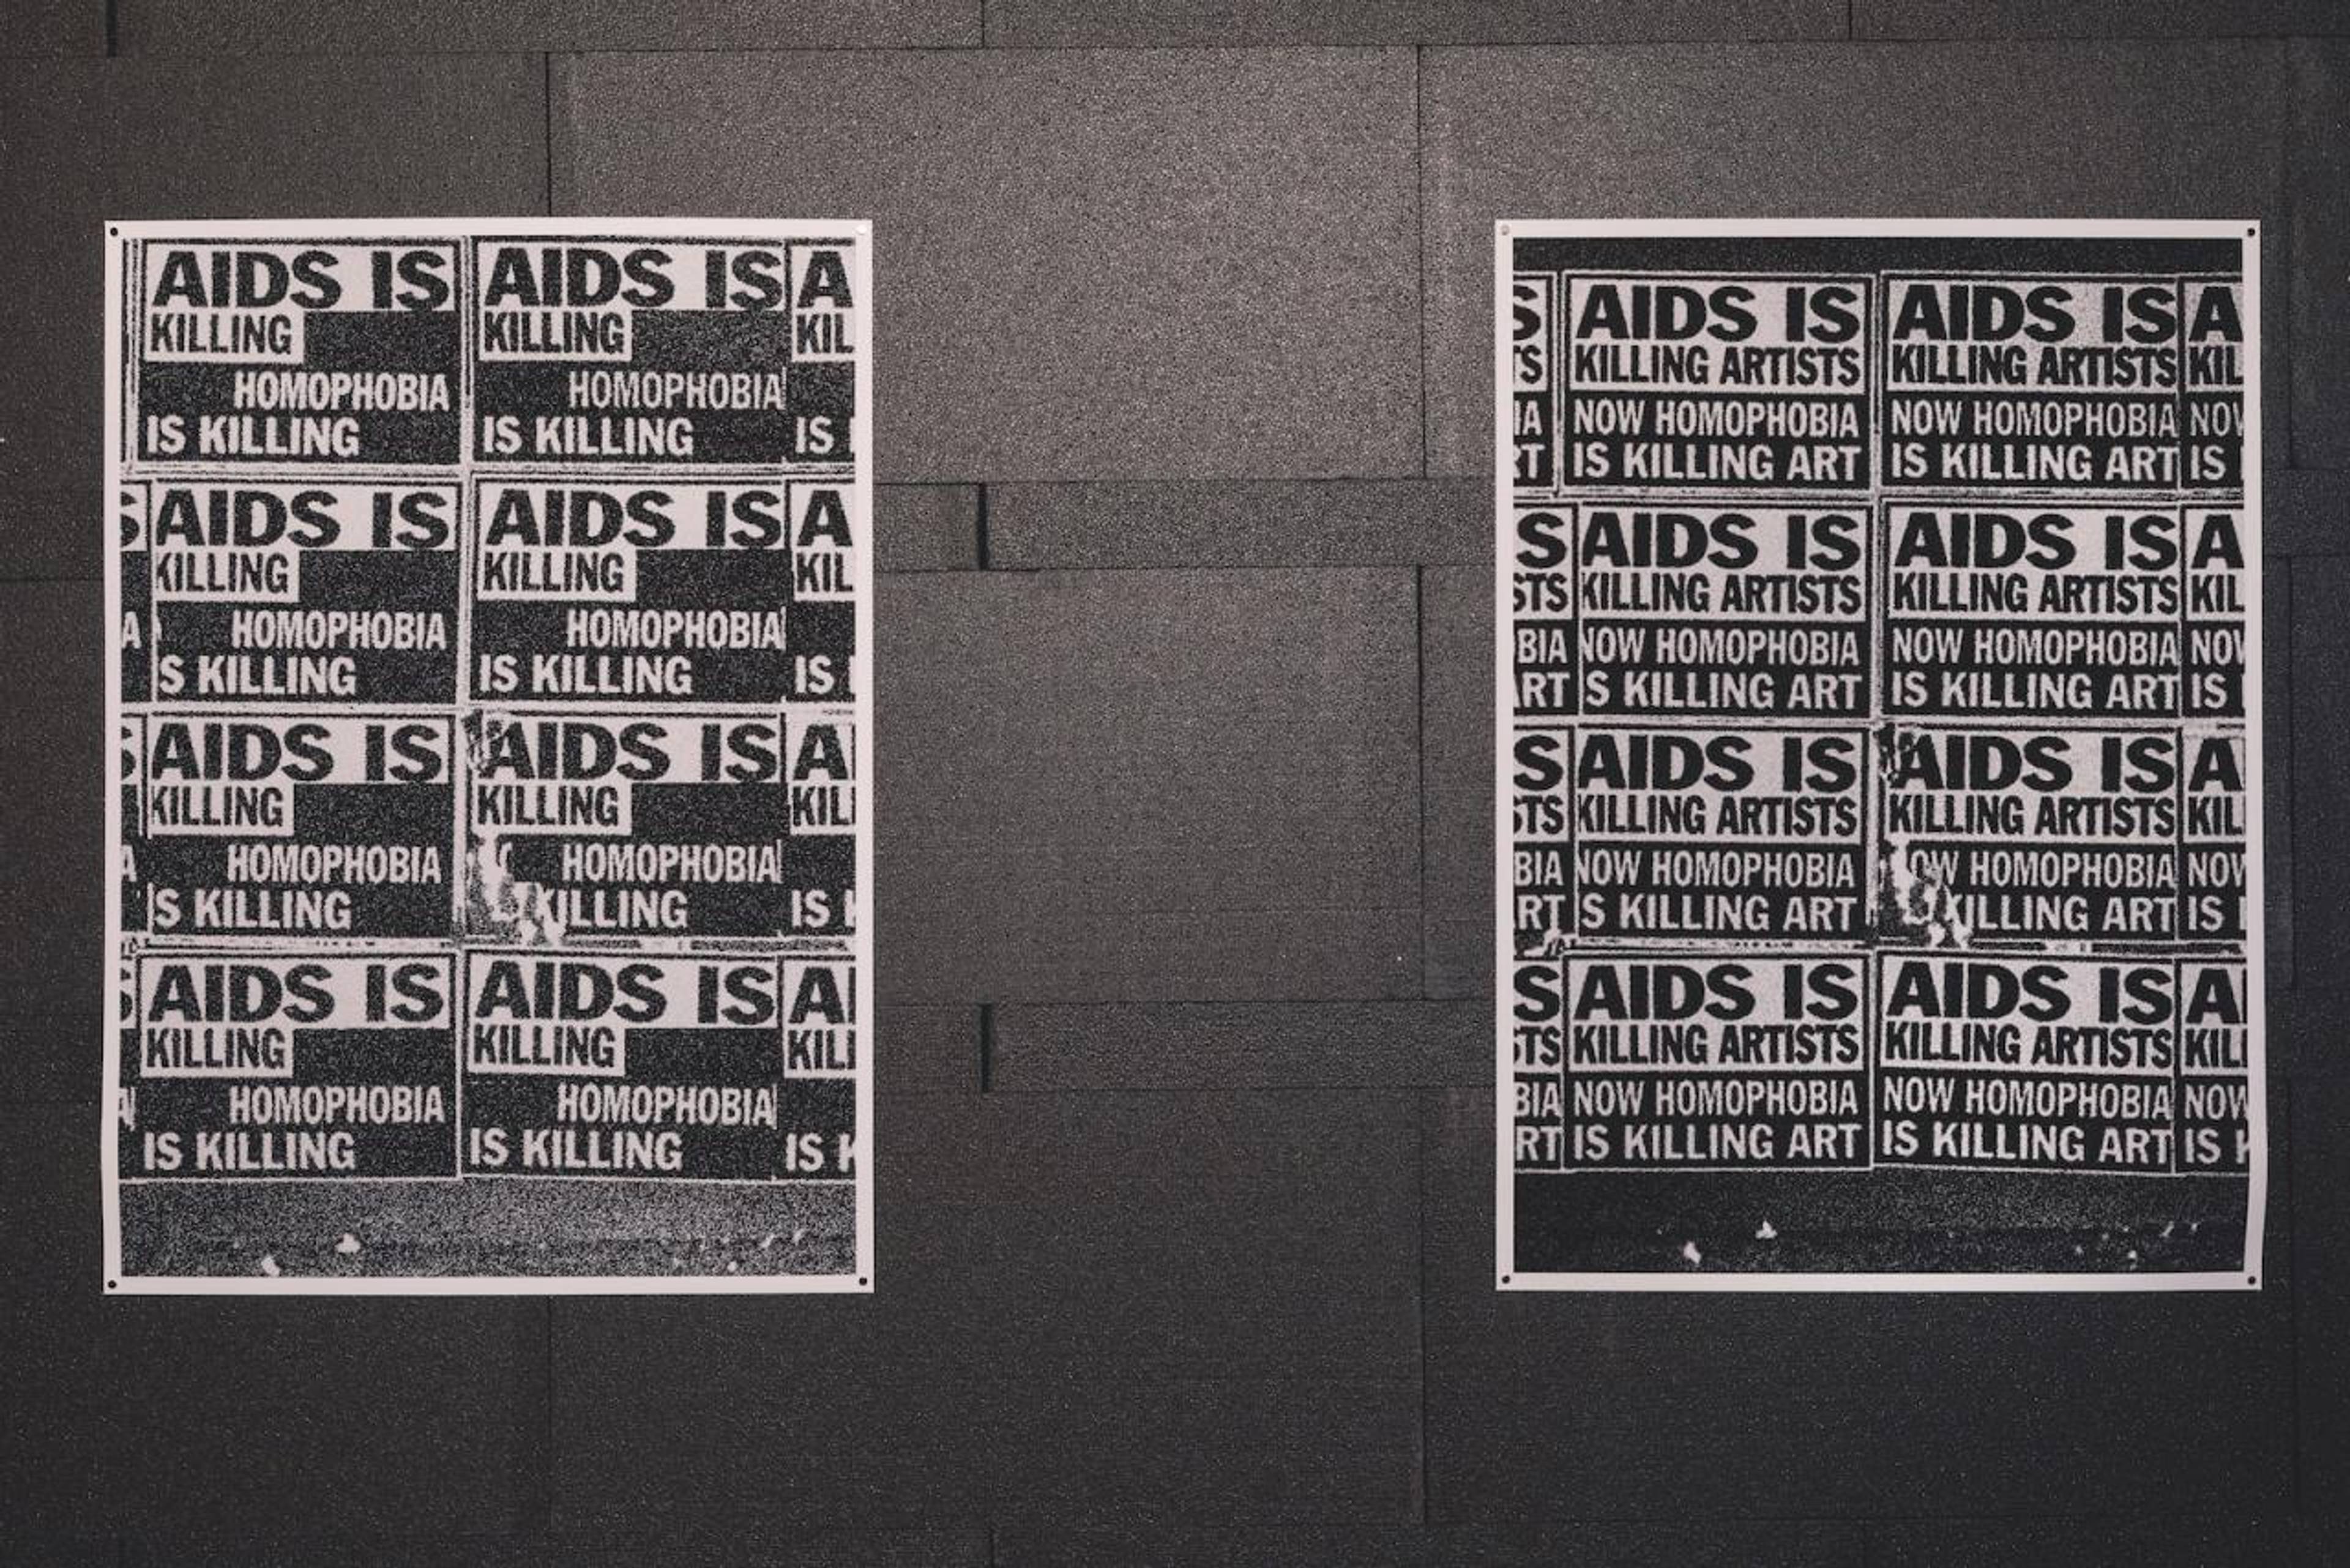 Terre Thaemlitz, Fuck Art, 2020, digital prints, 220 × 80 cm (each), reconstructed documentation of corrective graffiti on posters by Art Positive in New York City, ca. 1989